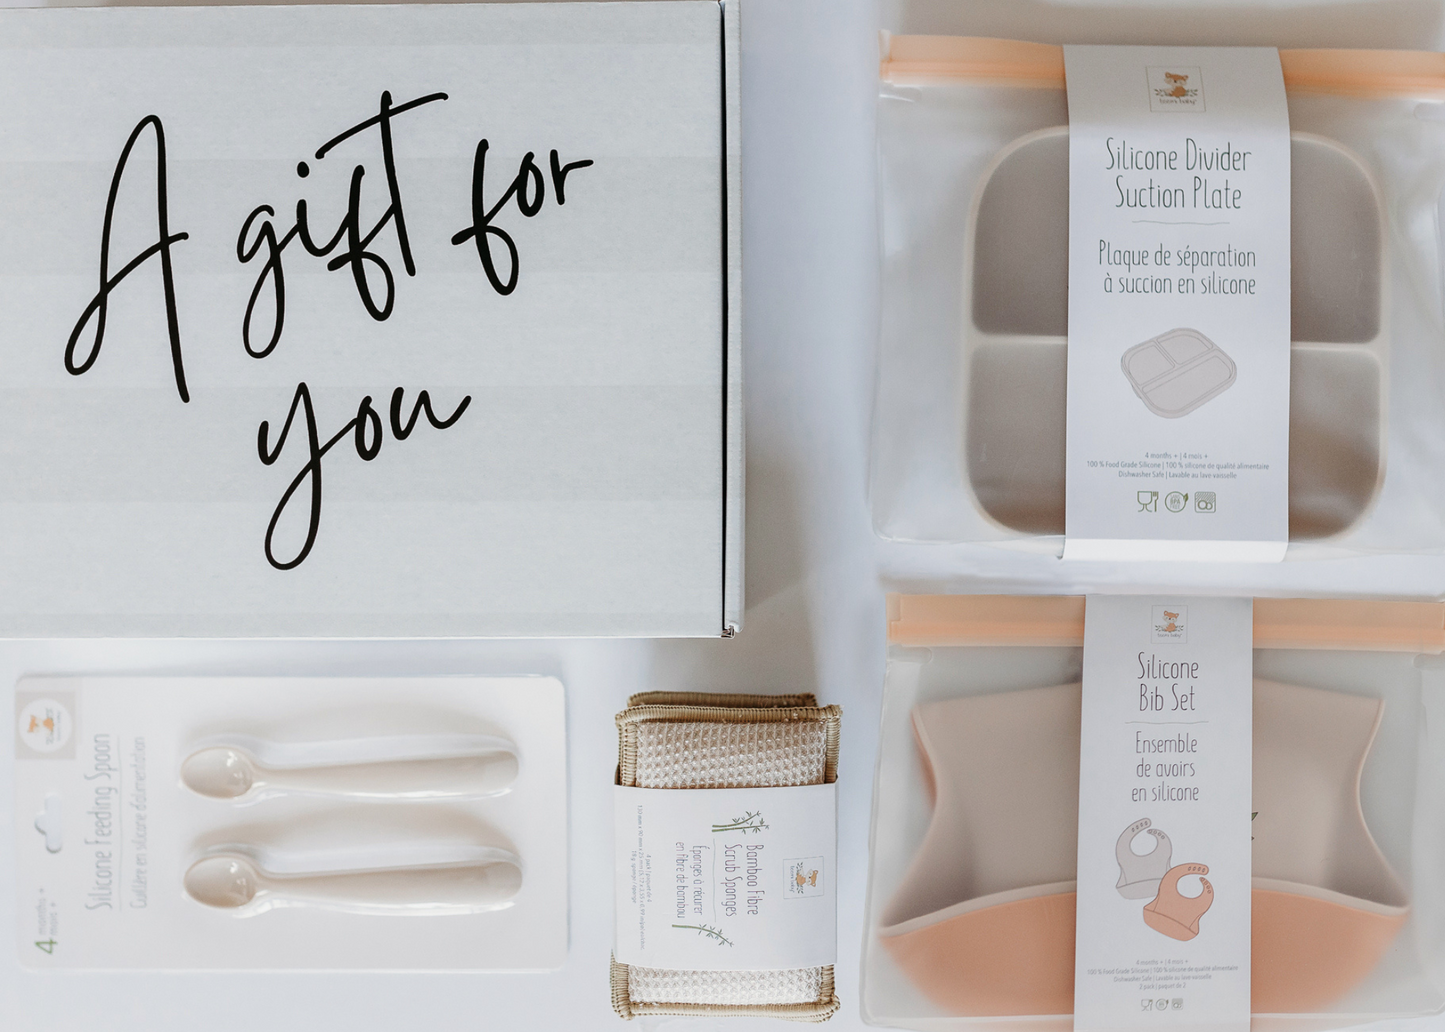 Meal Time Gift Sets